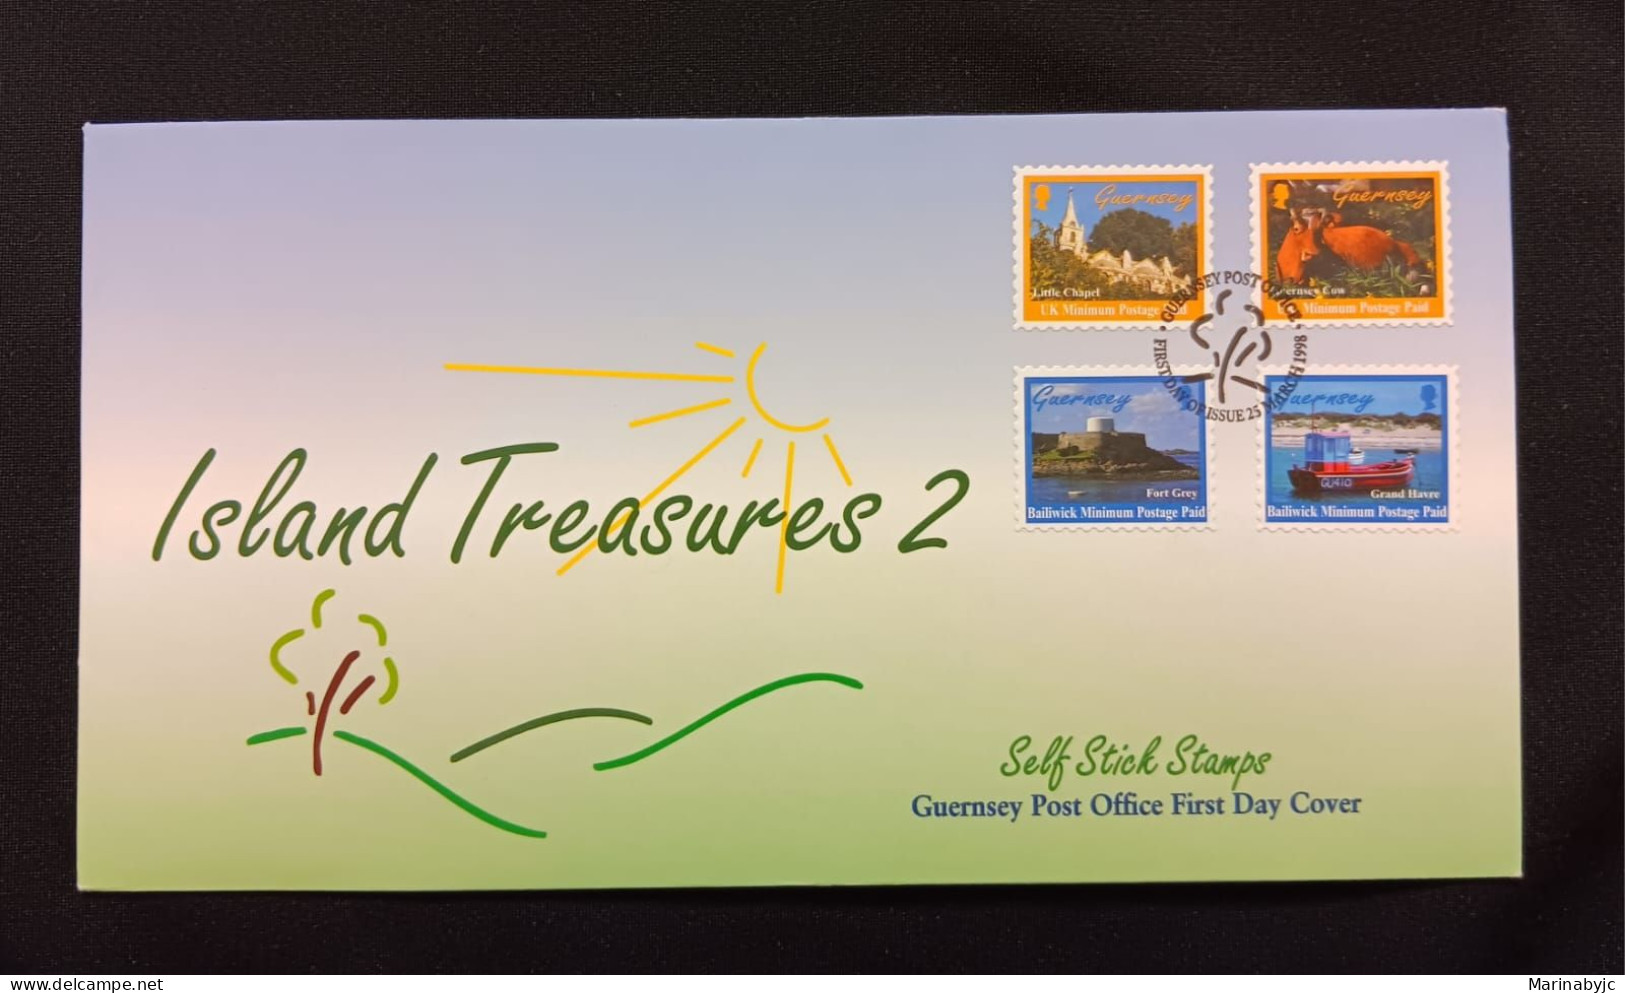 DM)1998, GUERNSEY, FIRST DAY COVER, ISSUE, TREASURE OF THE ISLAND 2, TOURISM, STICKERS, ENCRYPTIONS, LITTLE CHAPEL, COW, - Guernesey